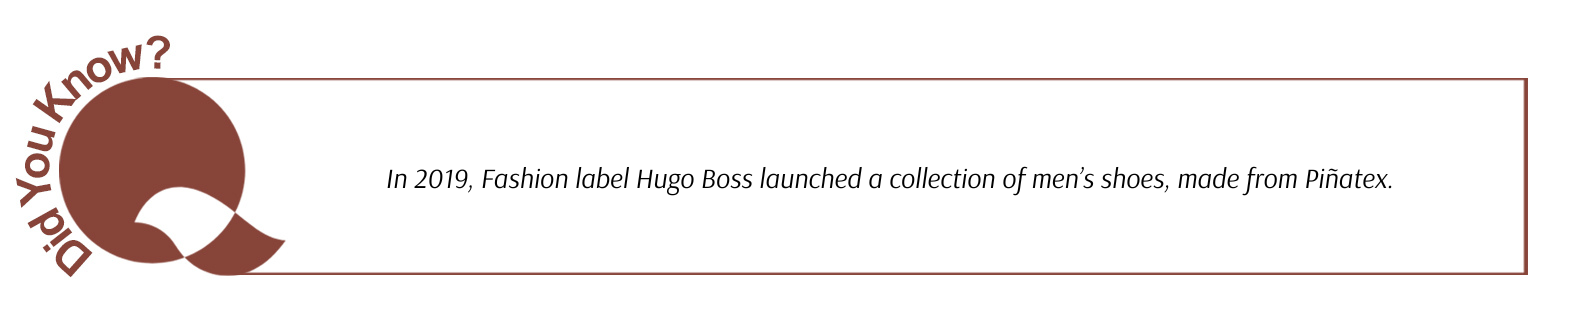 Did you know // In 2019, Fashion label Hugo Boss launched a collection of men’s shoes, made from Piñatex.